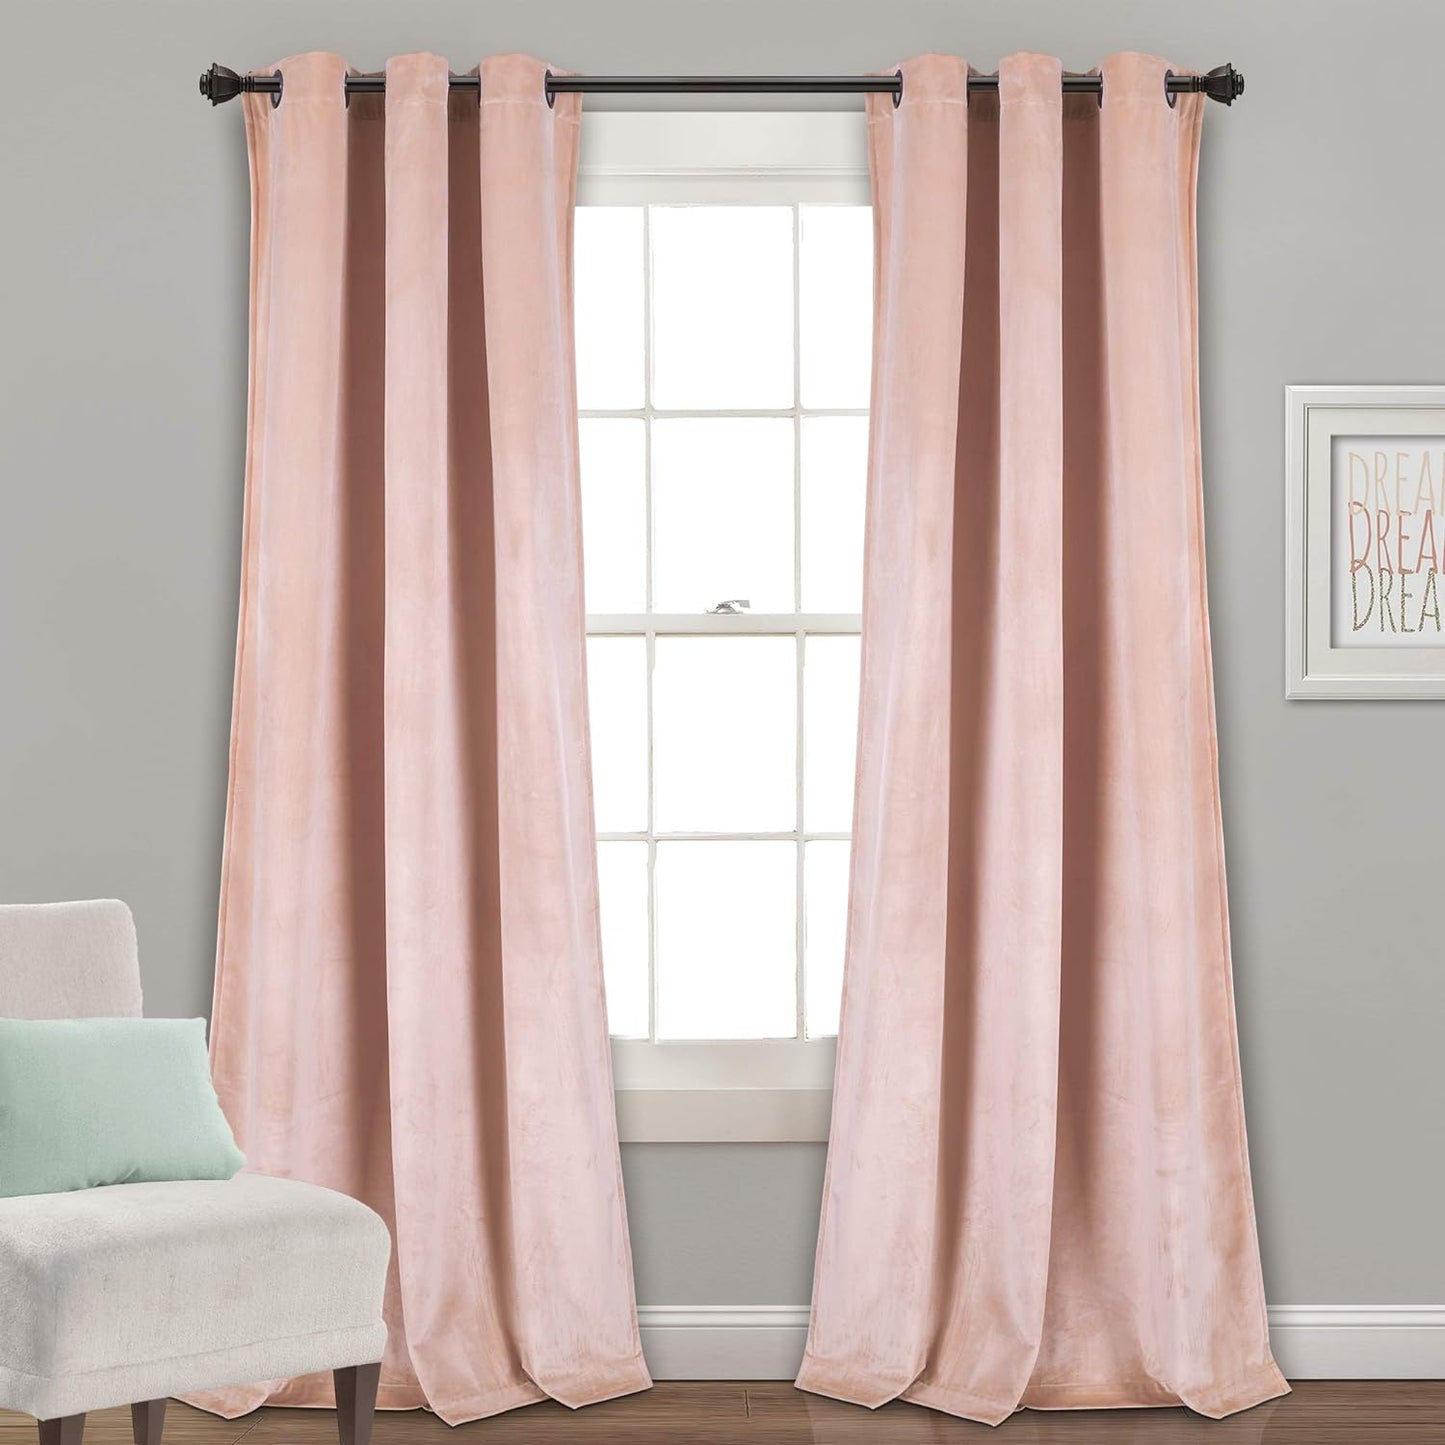 Lush Decor Prima Velvet Curtains Color Block Light Filtering Window Panel Set for Living, Dining, Bedroom (Pair), 38" W X 84" L, Navy  Triangle Home Fashions Blush Room Darkening 38"W X 84"L